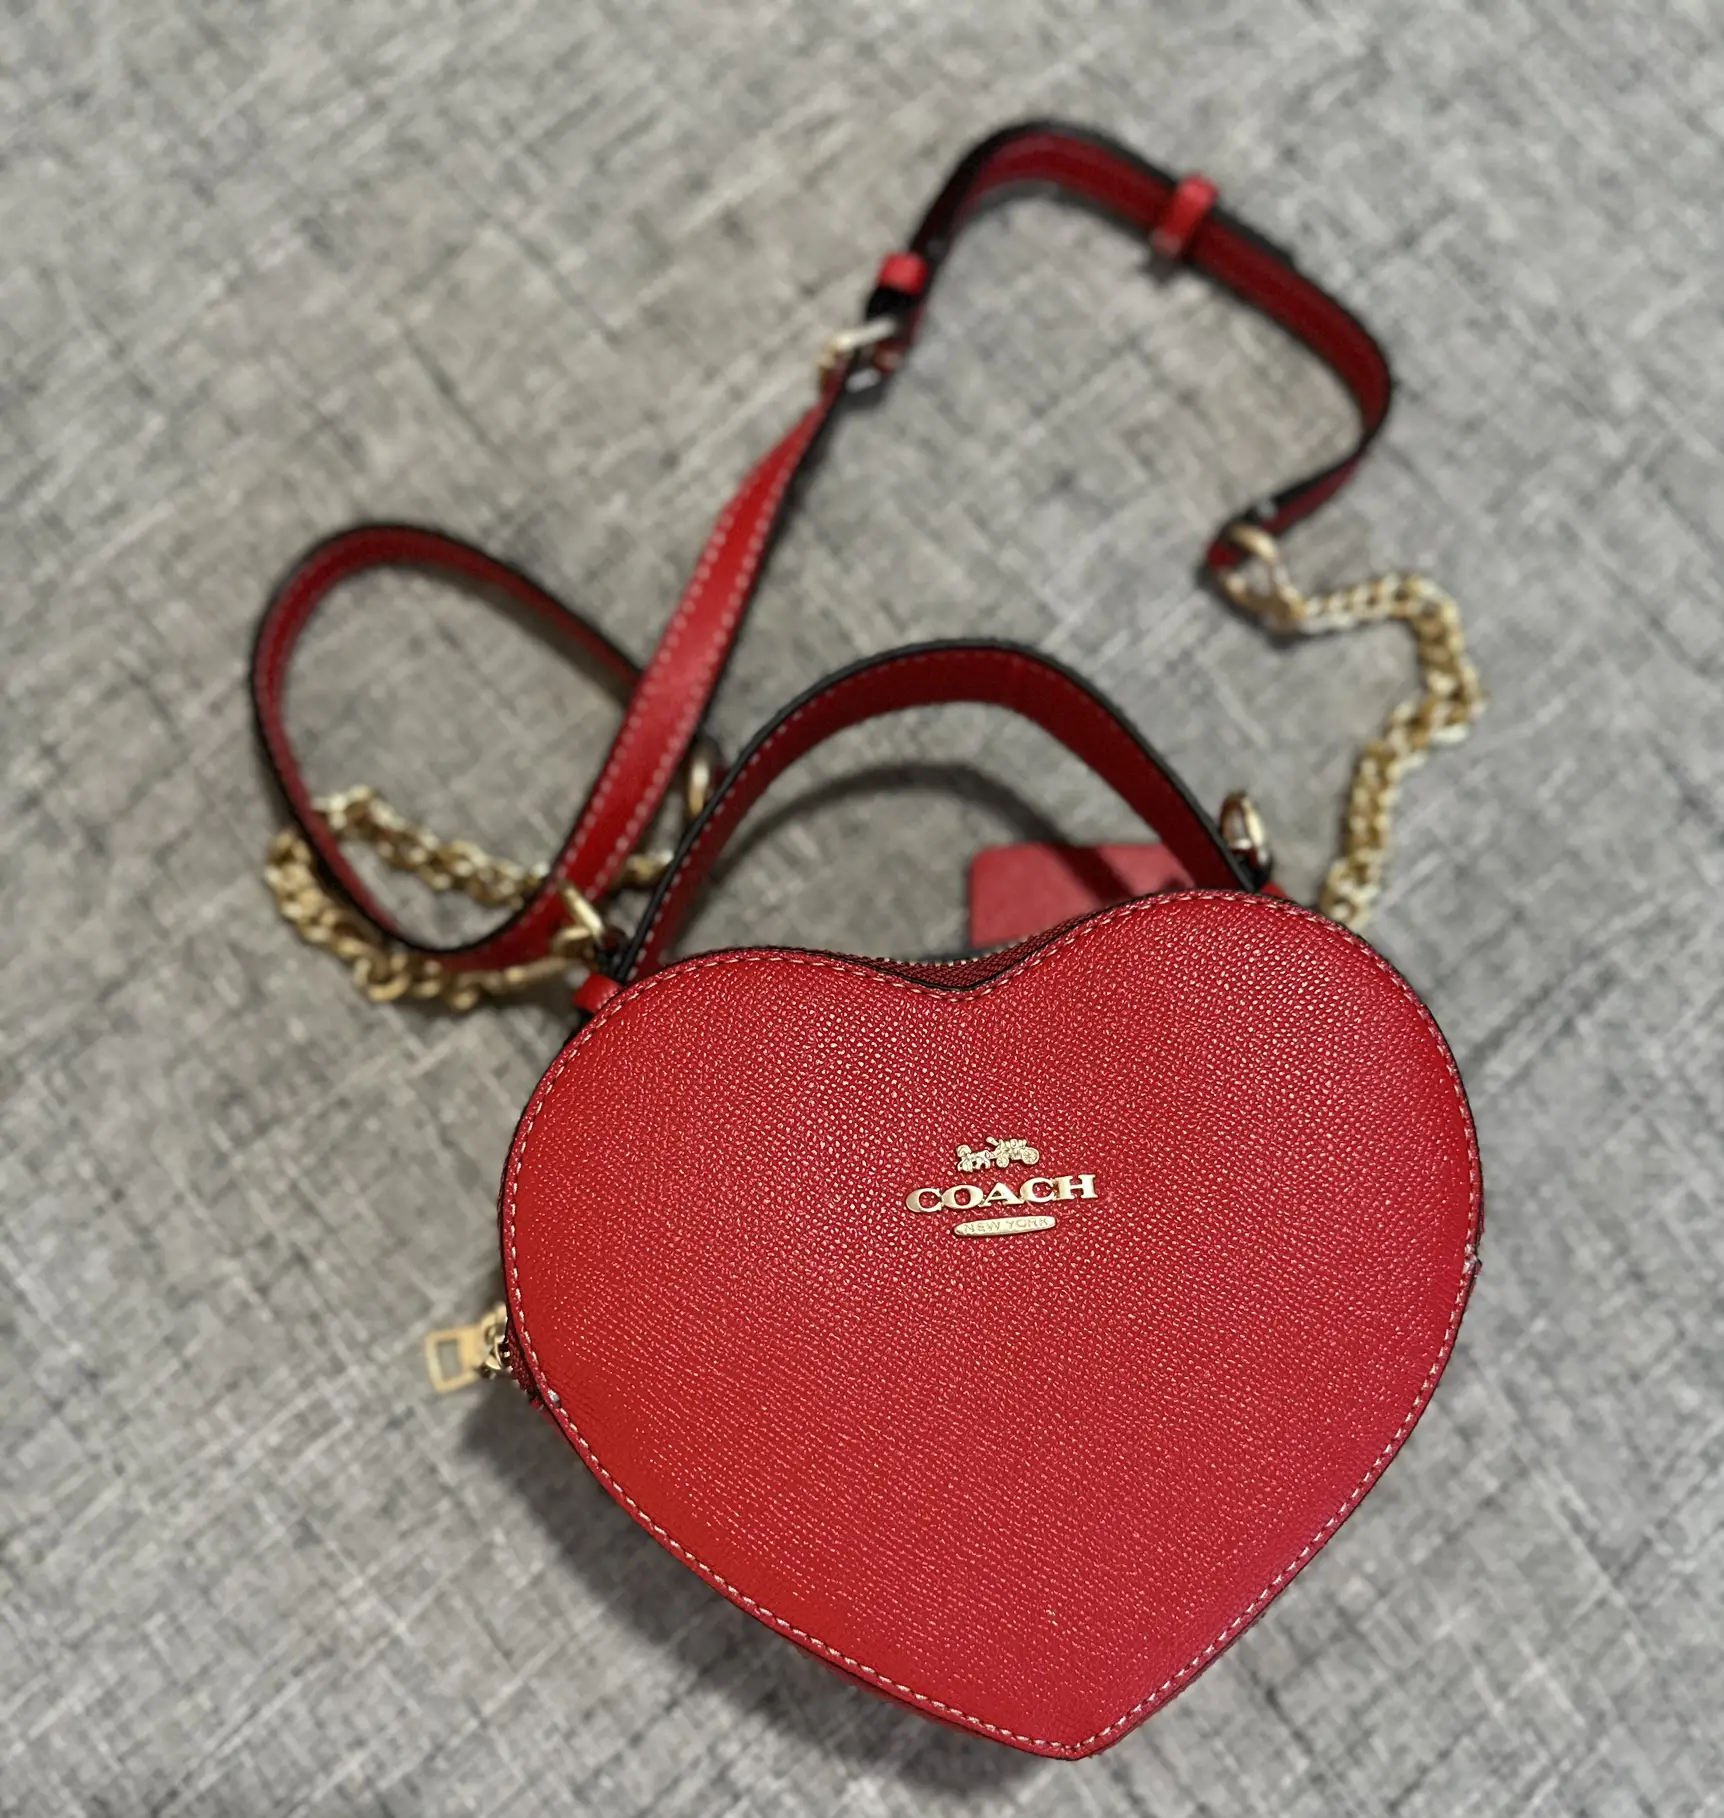 Coach's viral heart crossbody bag is back in stock and it's perfect for  Valentine's Day